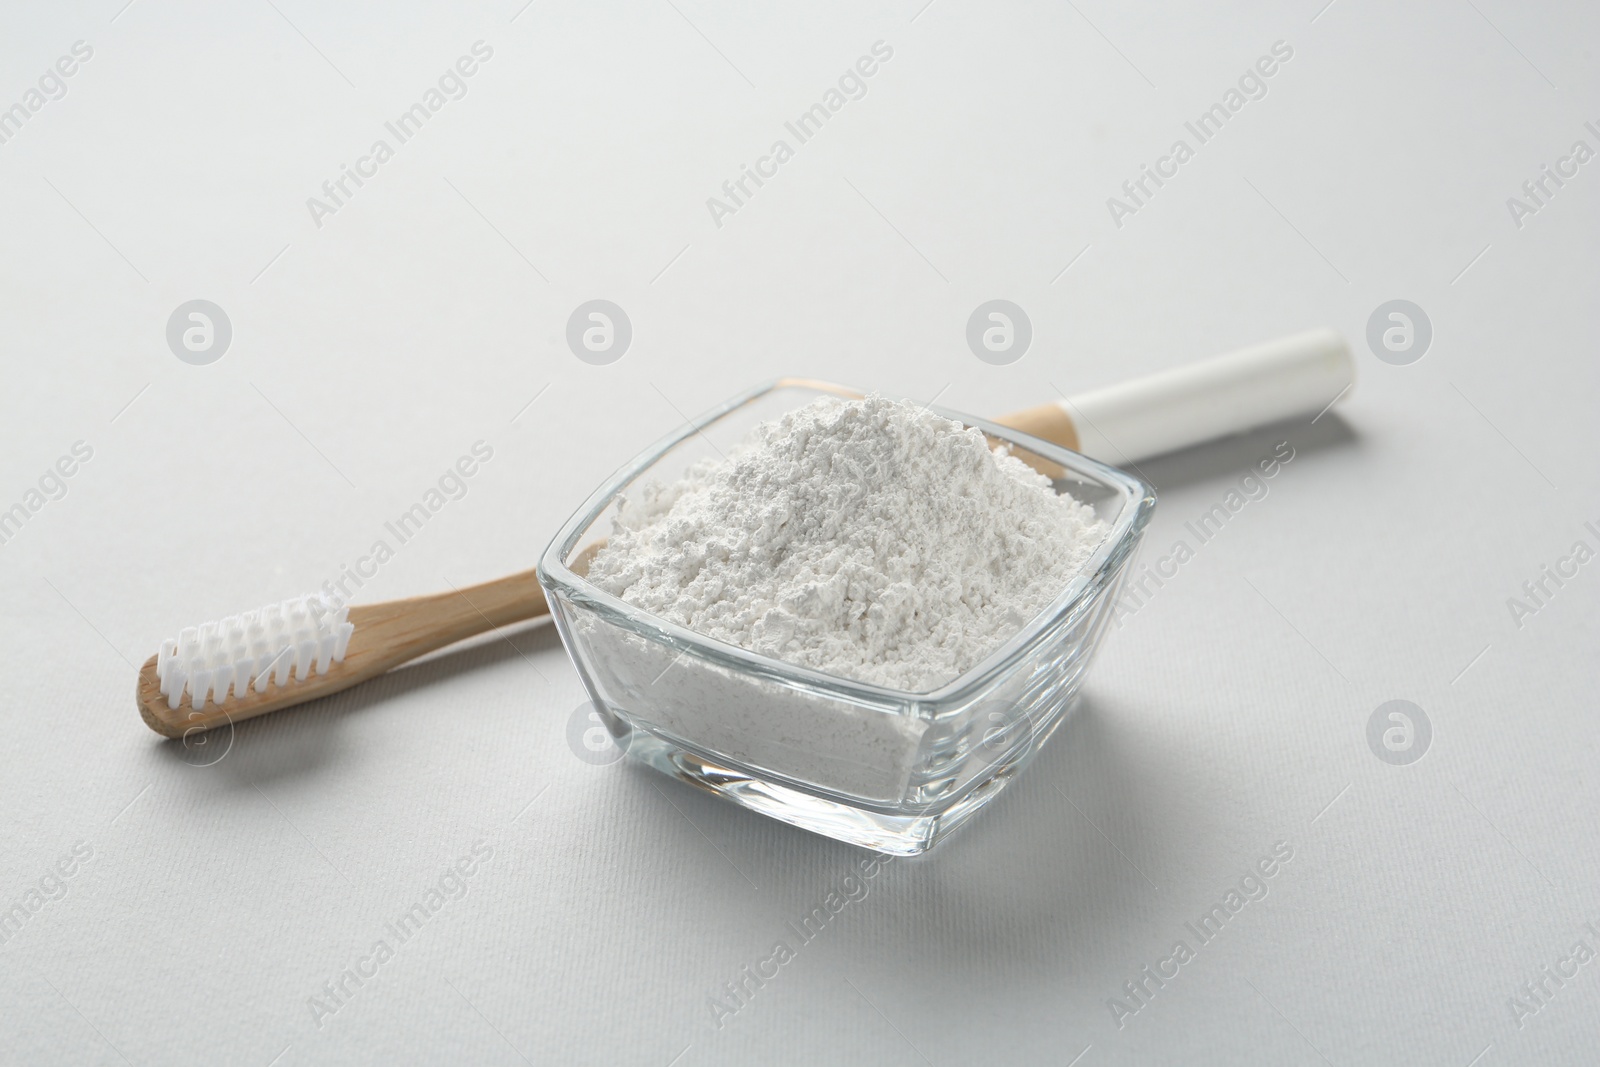 Photo of Tooth powder and brush on white background